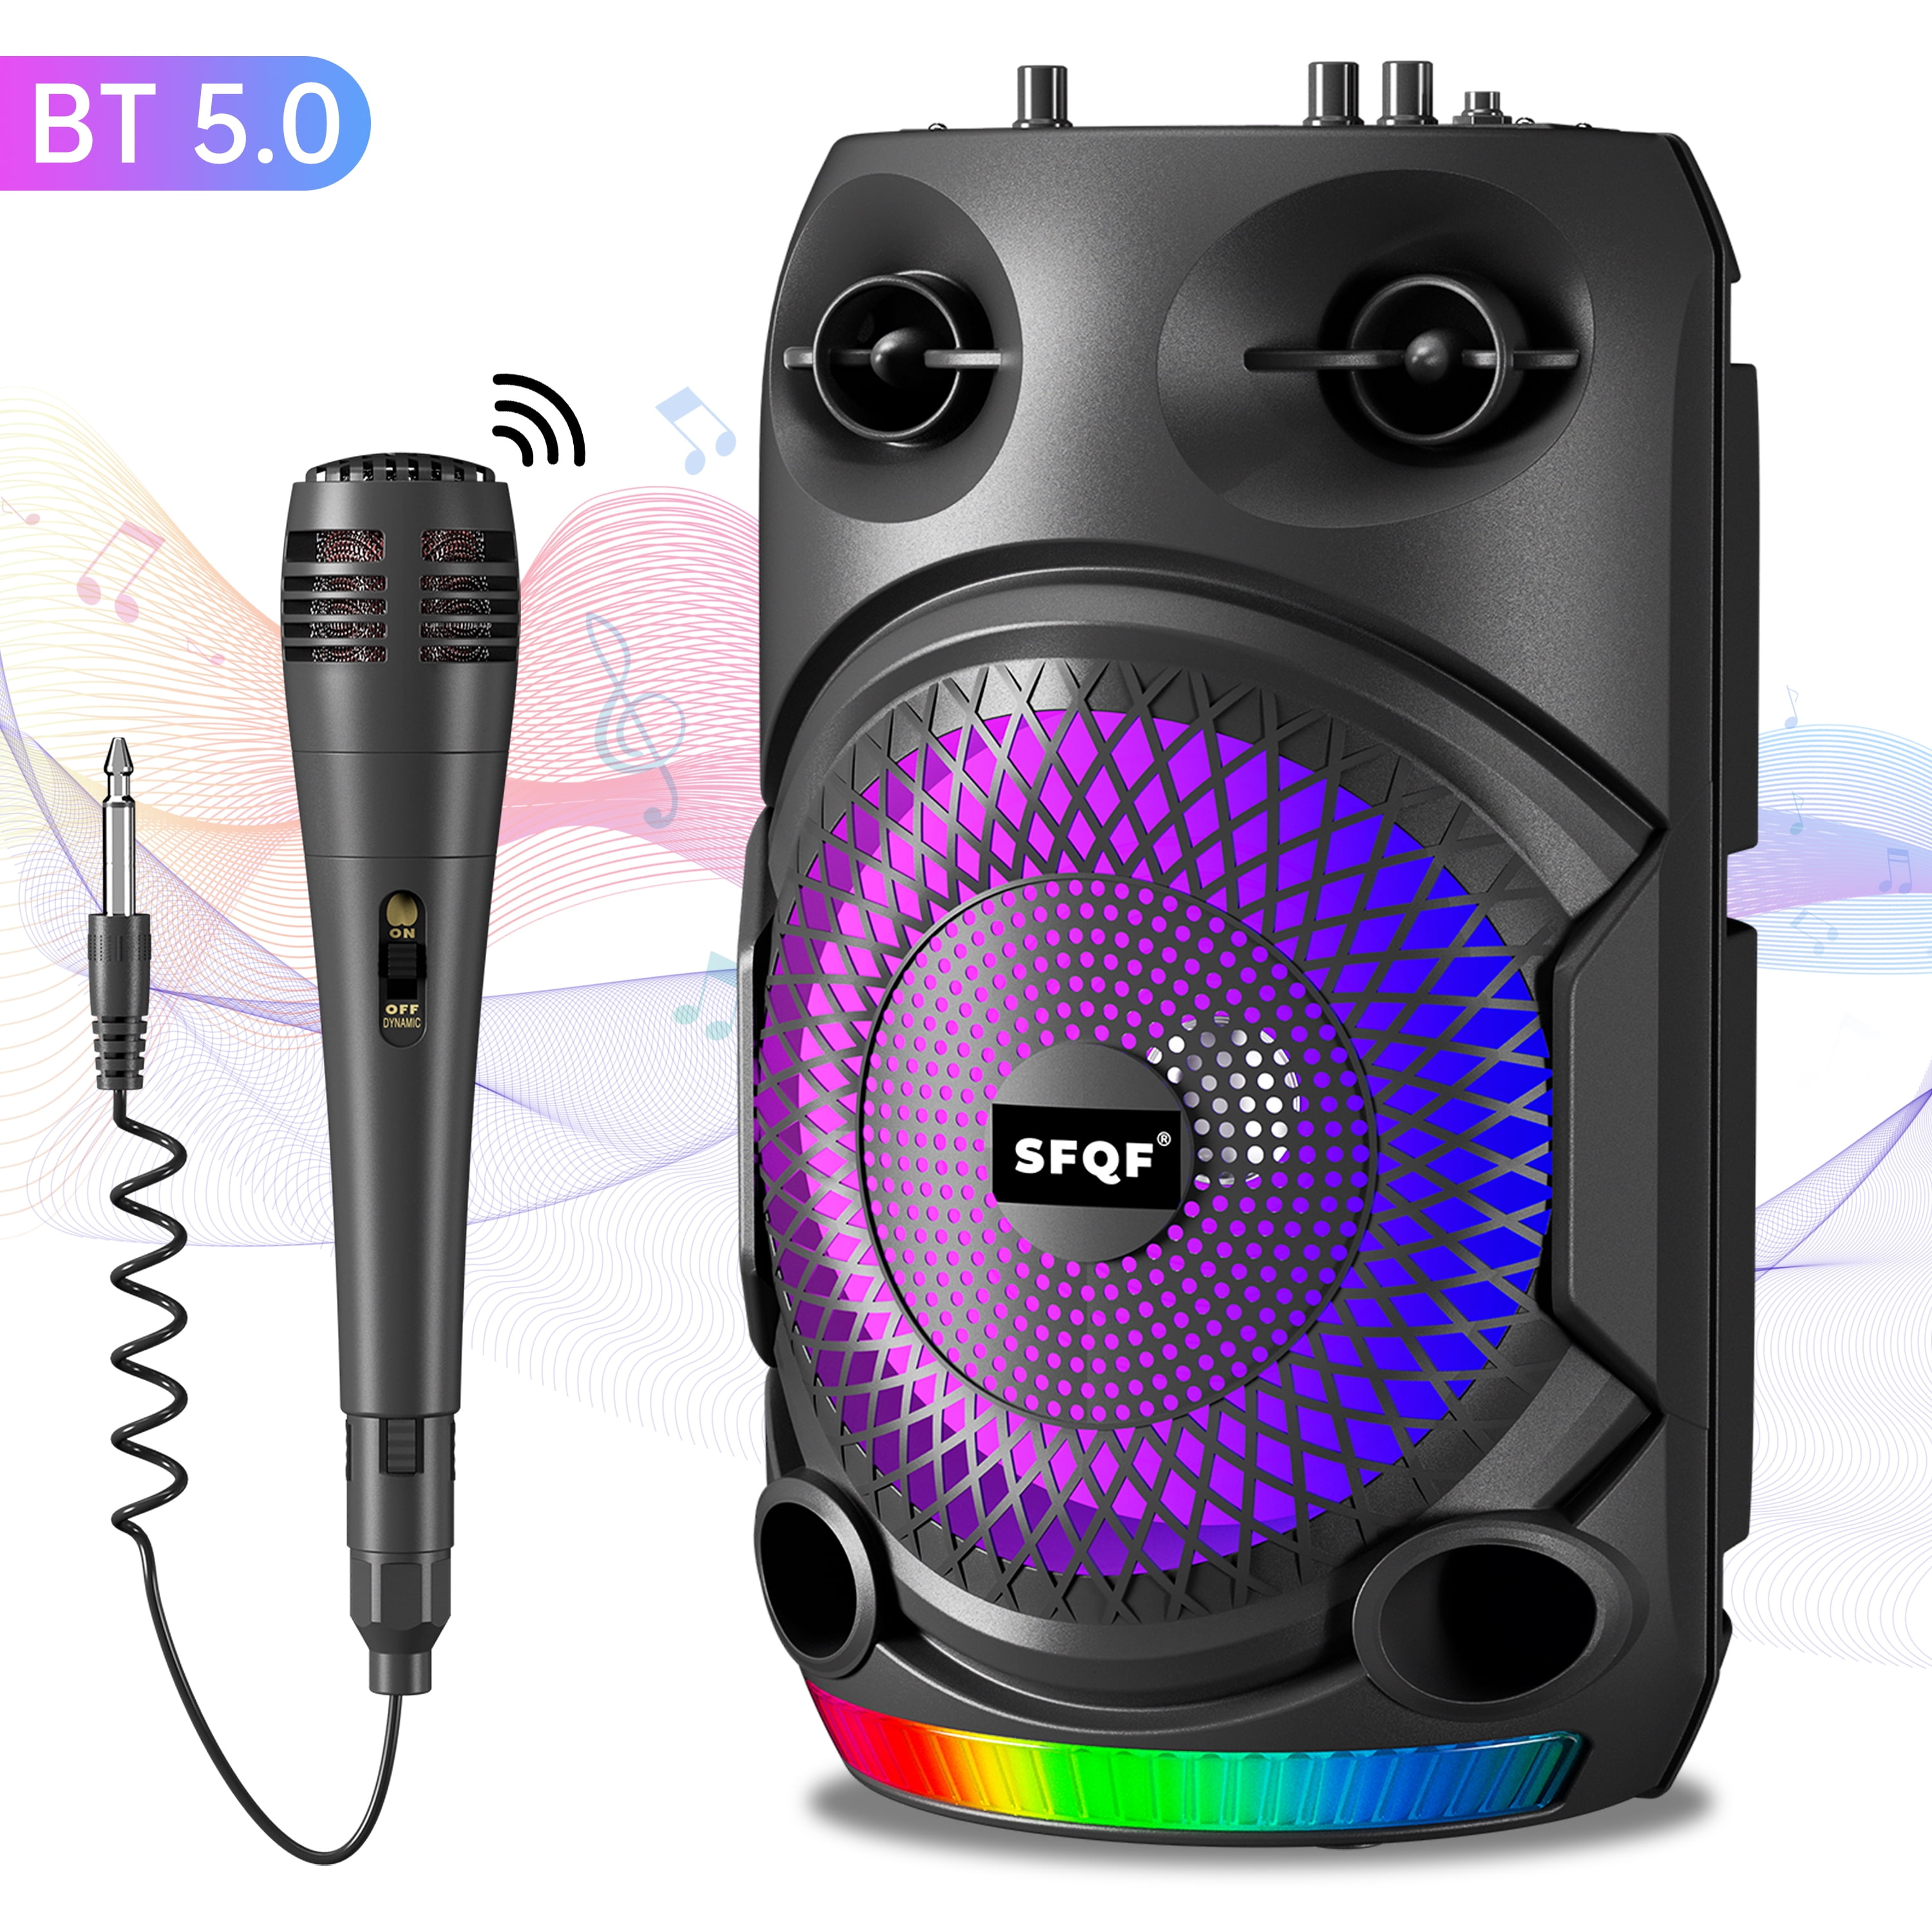 Kunodi Bluetooth Speaker, Bluetooth 5.3 Wireless Portable Speaker with 10W  Stereo Sound, Party Speakers with Dynamic RGB Light,18-Hour Playtime,IPX5